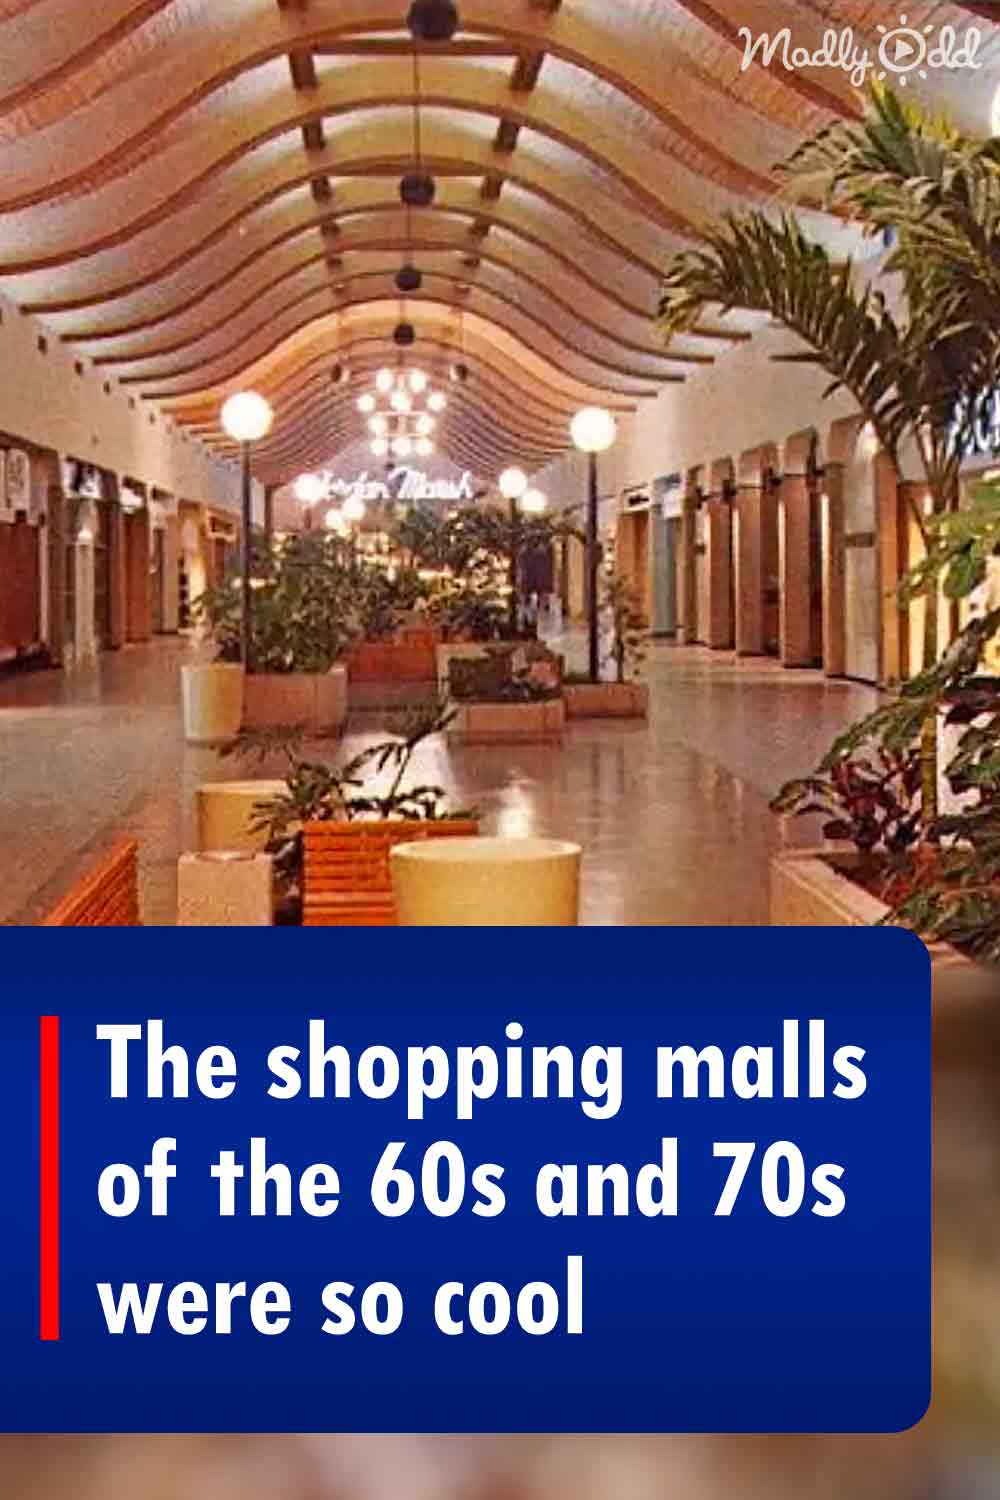 The shopping malls of the 60s and 70s were so cool